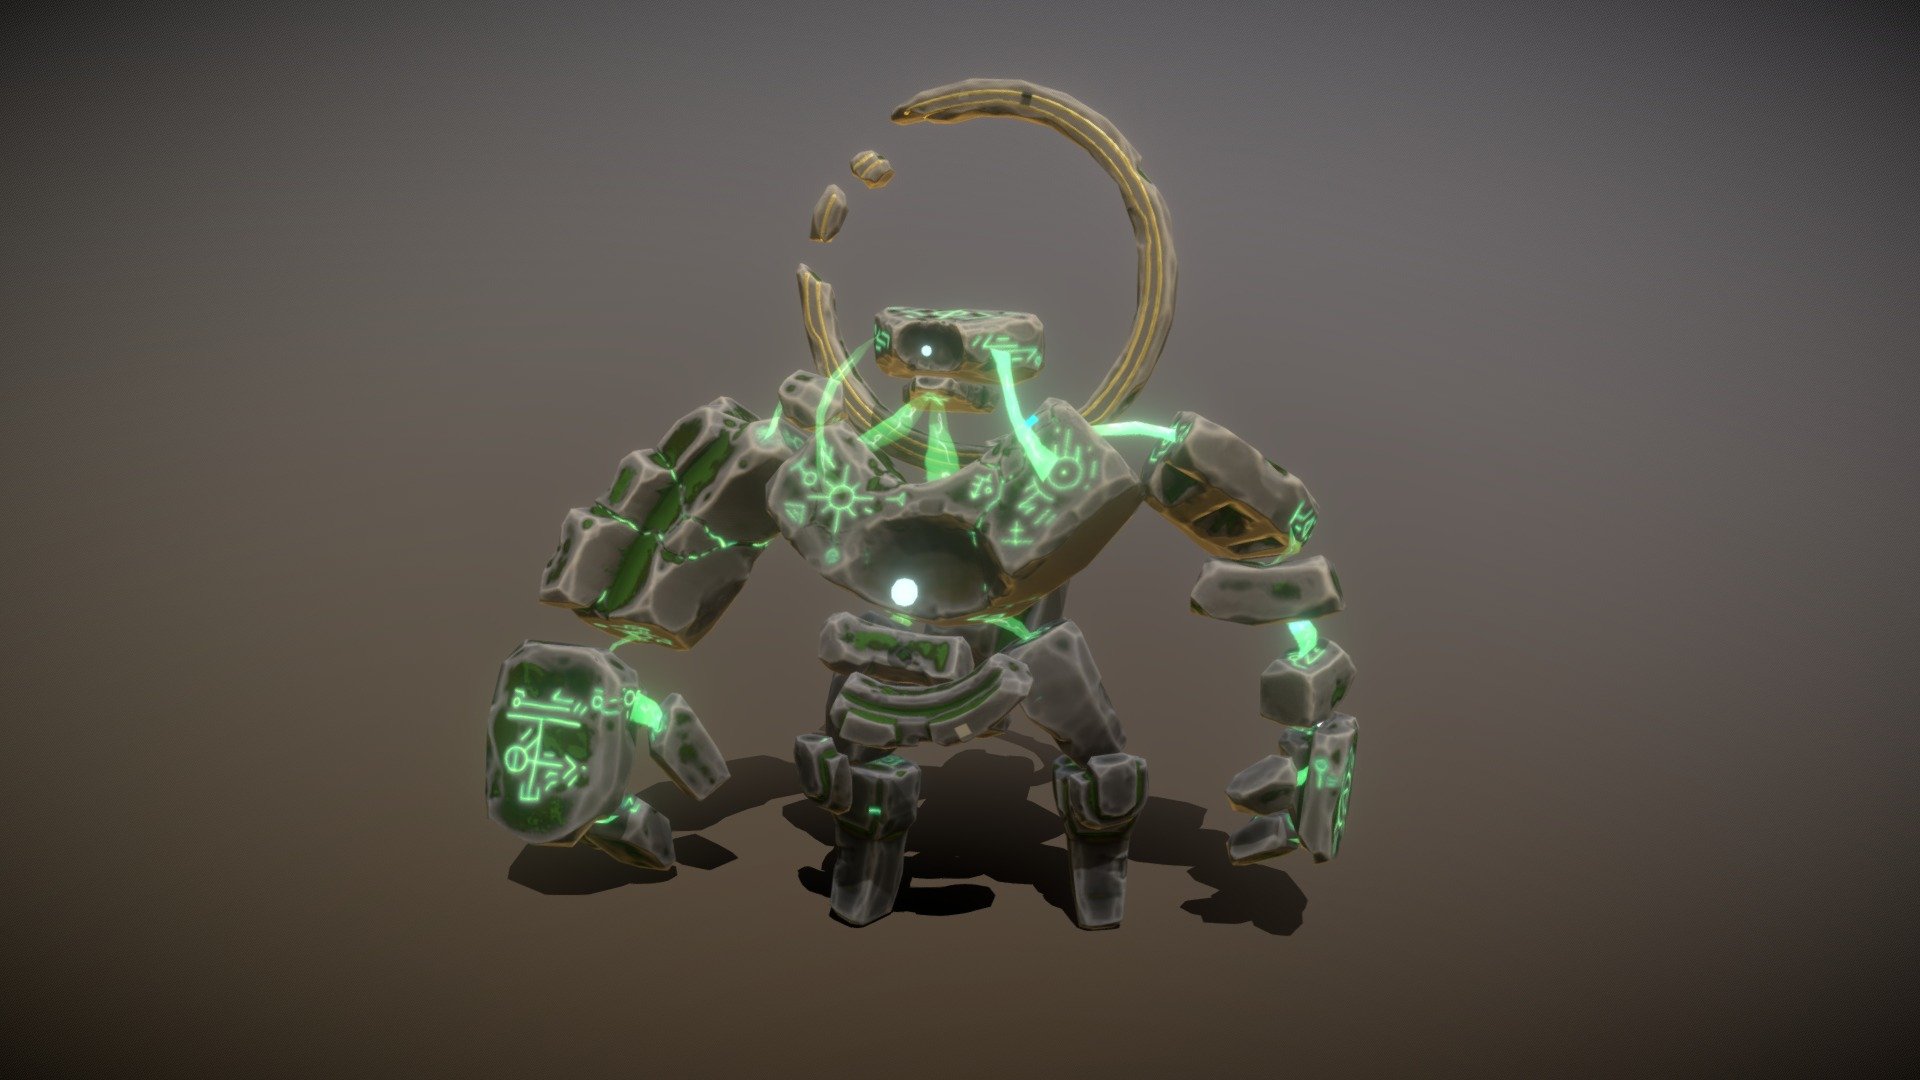 Another enemy for our Dice Roguelike.

follow the game's development and play it for free on our Discord:
https://discord.com/invite/5AnXVPCqyx

And check out the VFX for his actions here:
https://twitter.com/Timskafte/status/1469272883780374530 - Inscribed Elemental - 3D model by Tim Skafte (@timskafte) 3d model